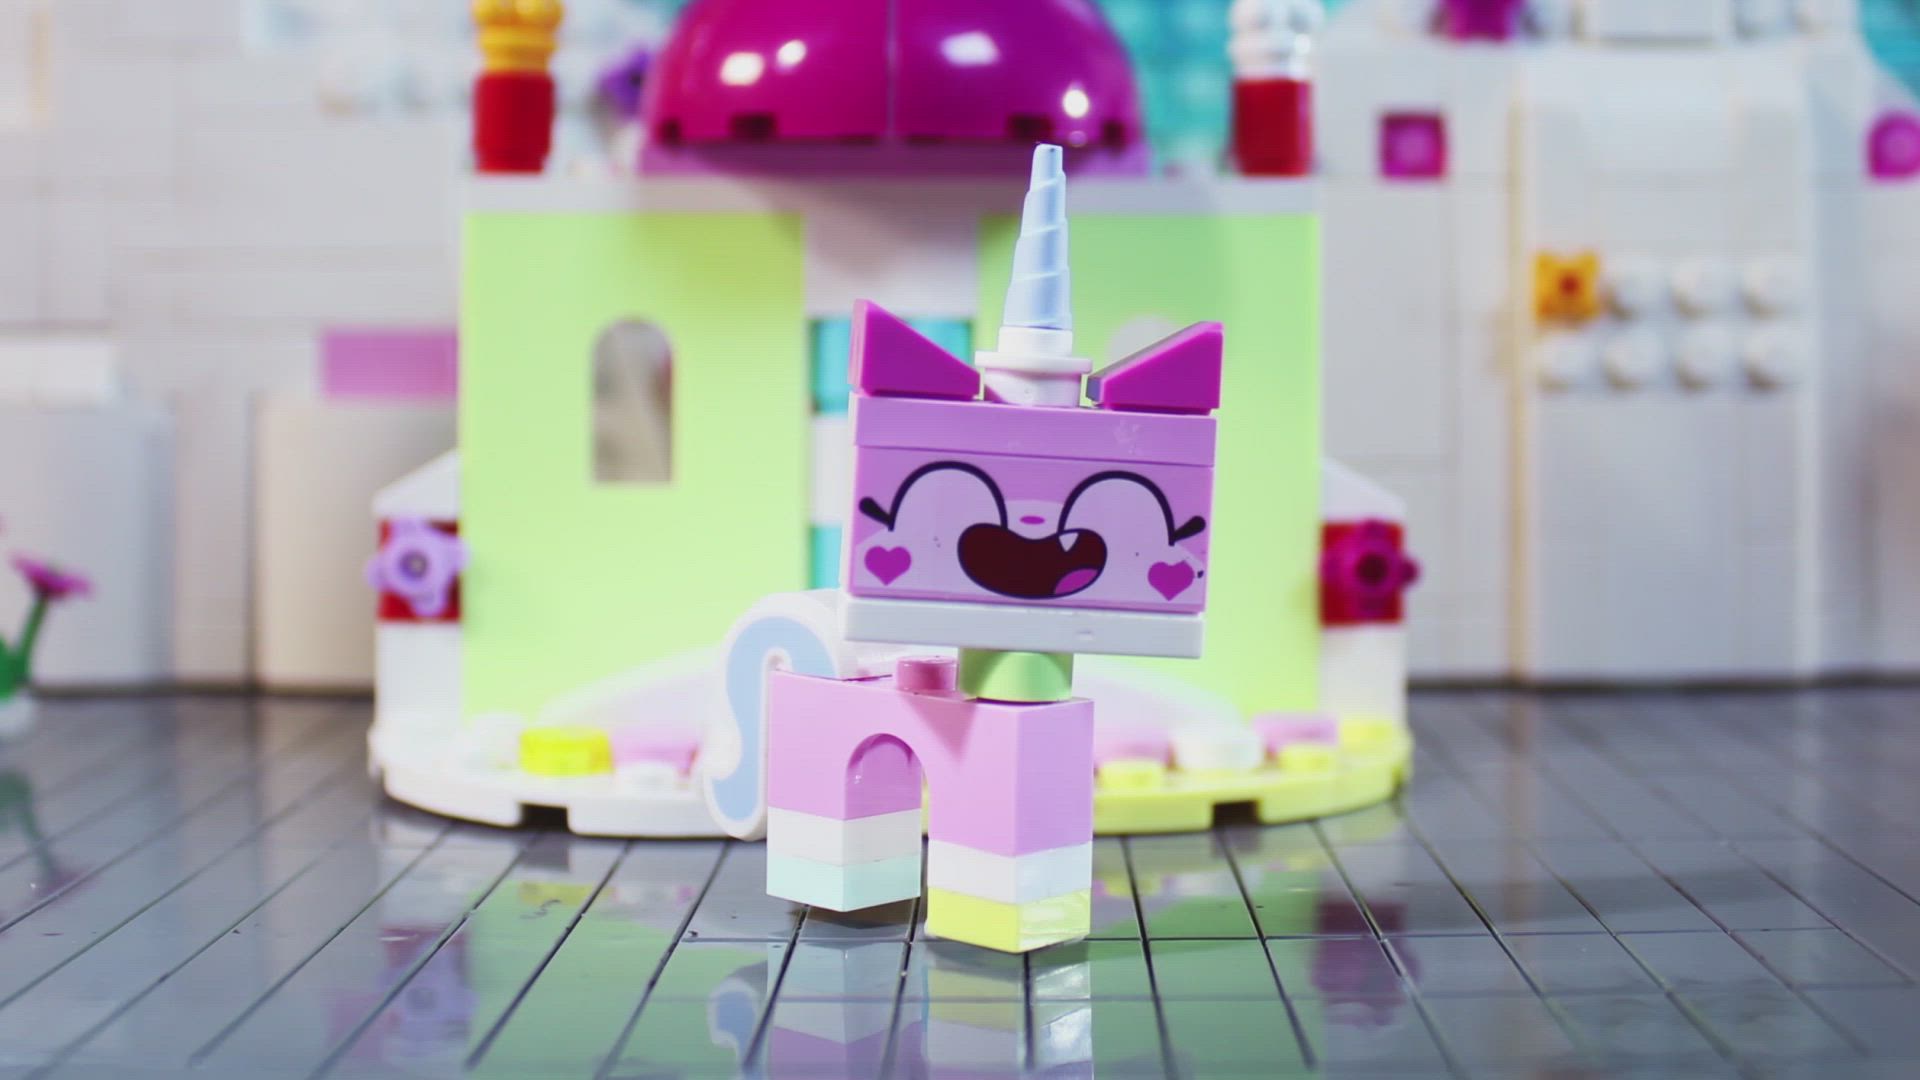 A About Unikitty™! – THE LEGO® MOVIE 2™ - THE LEGO® MOVIE 2™ Videos - LEGO.com for kids